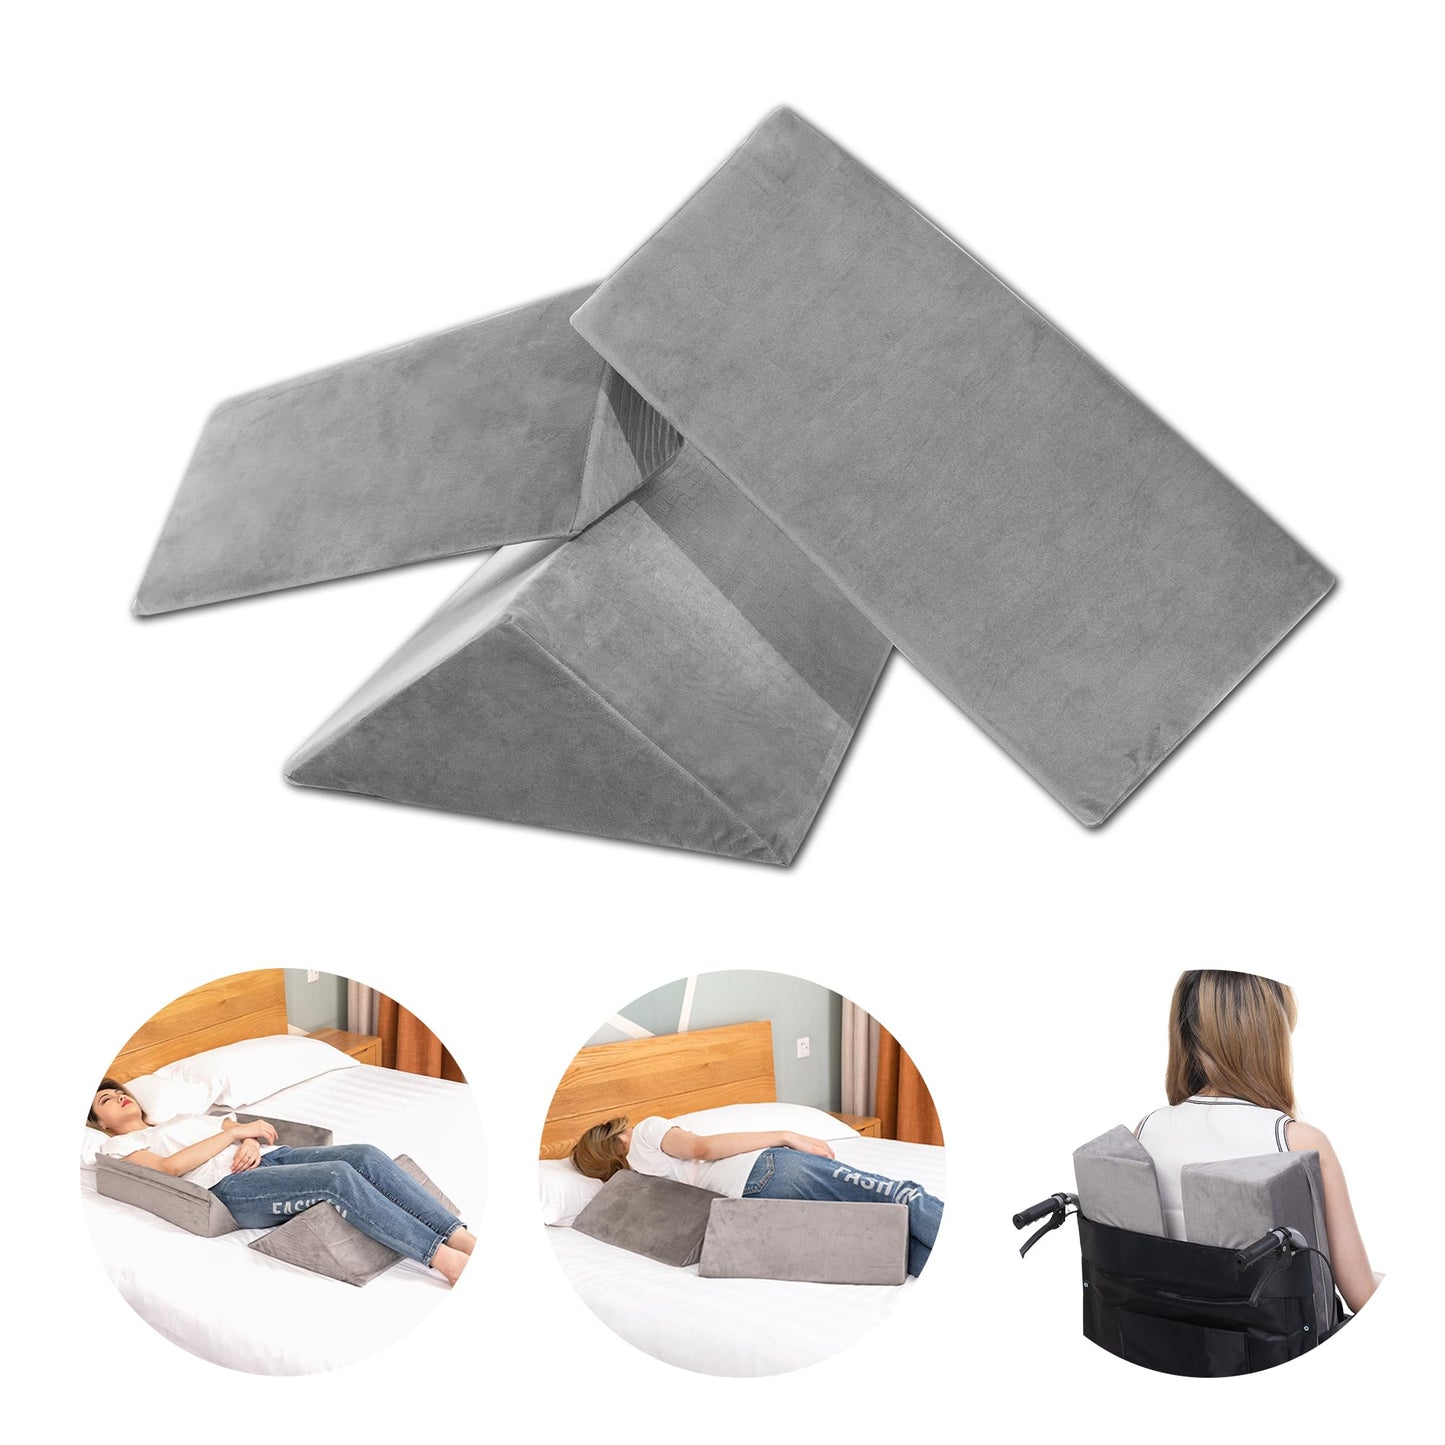 TYYIHUA Bed Wedges & Body Positioners for Elderly and Adults (3 in 1), 40 Degree Triangle Wedges for Bed Positioning, Side Wedge Pillows for After Surgery, Bed Wedges for Bedsores, Wedges for Body